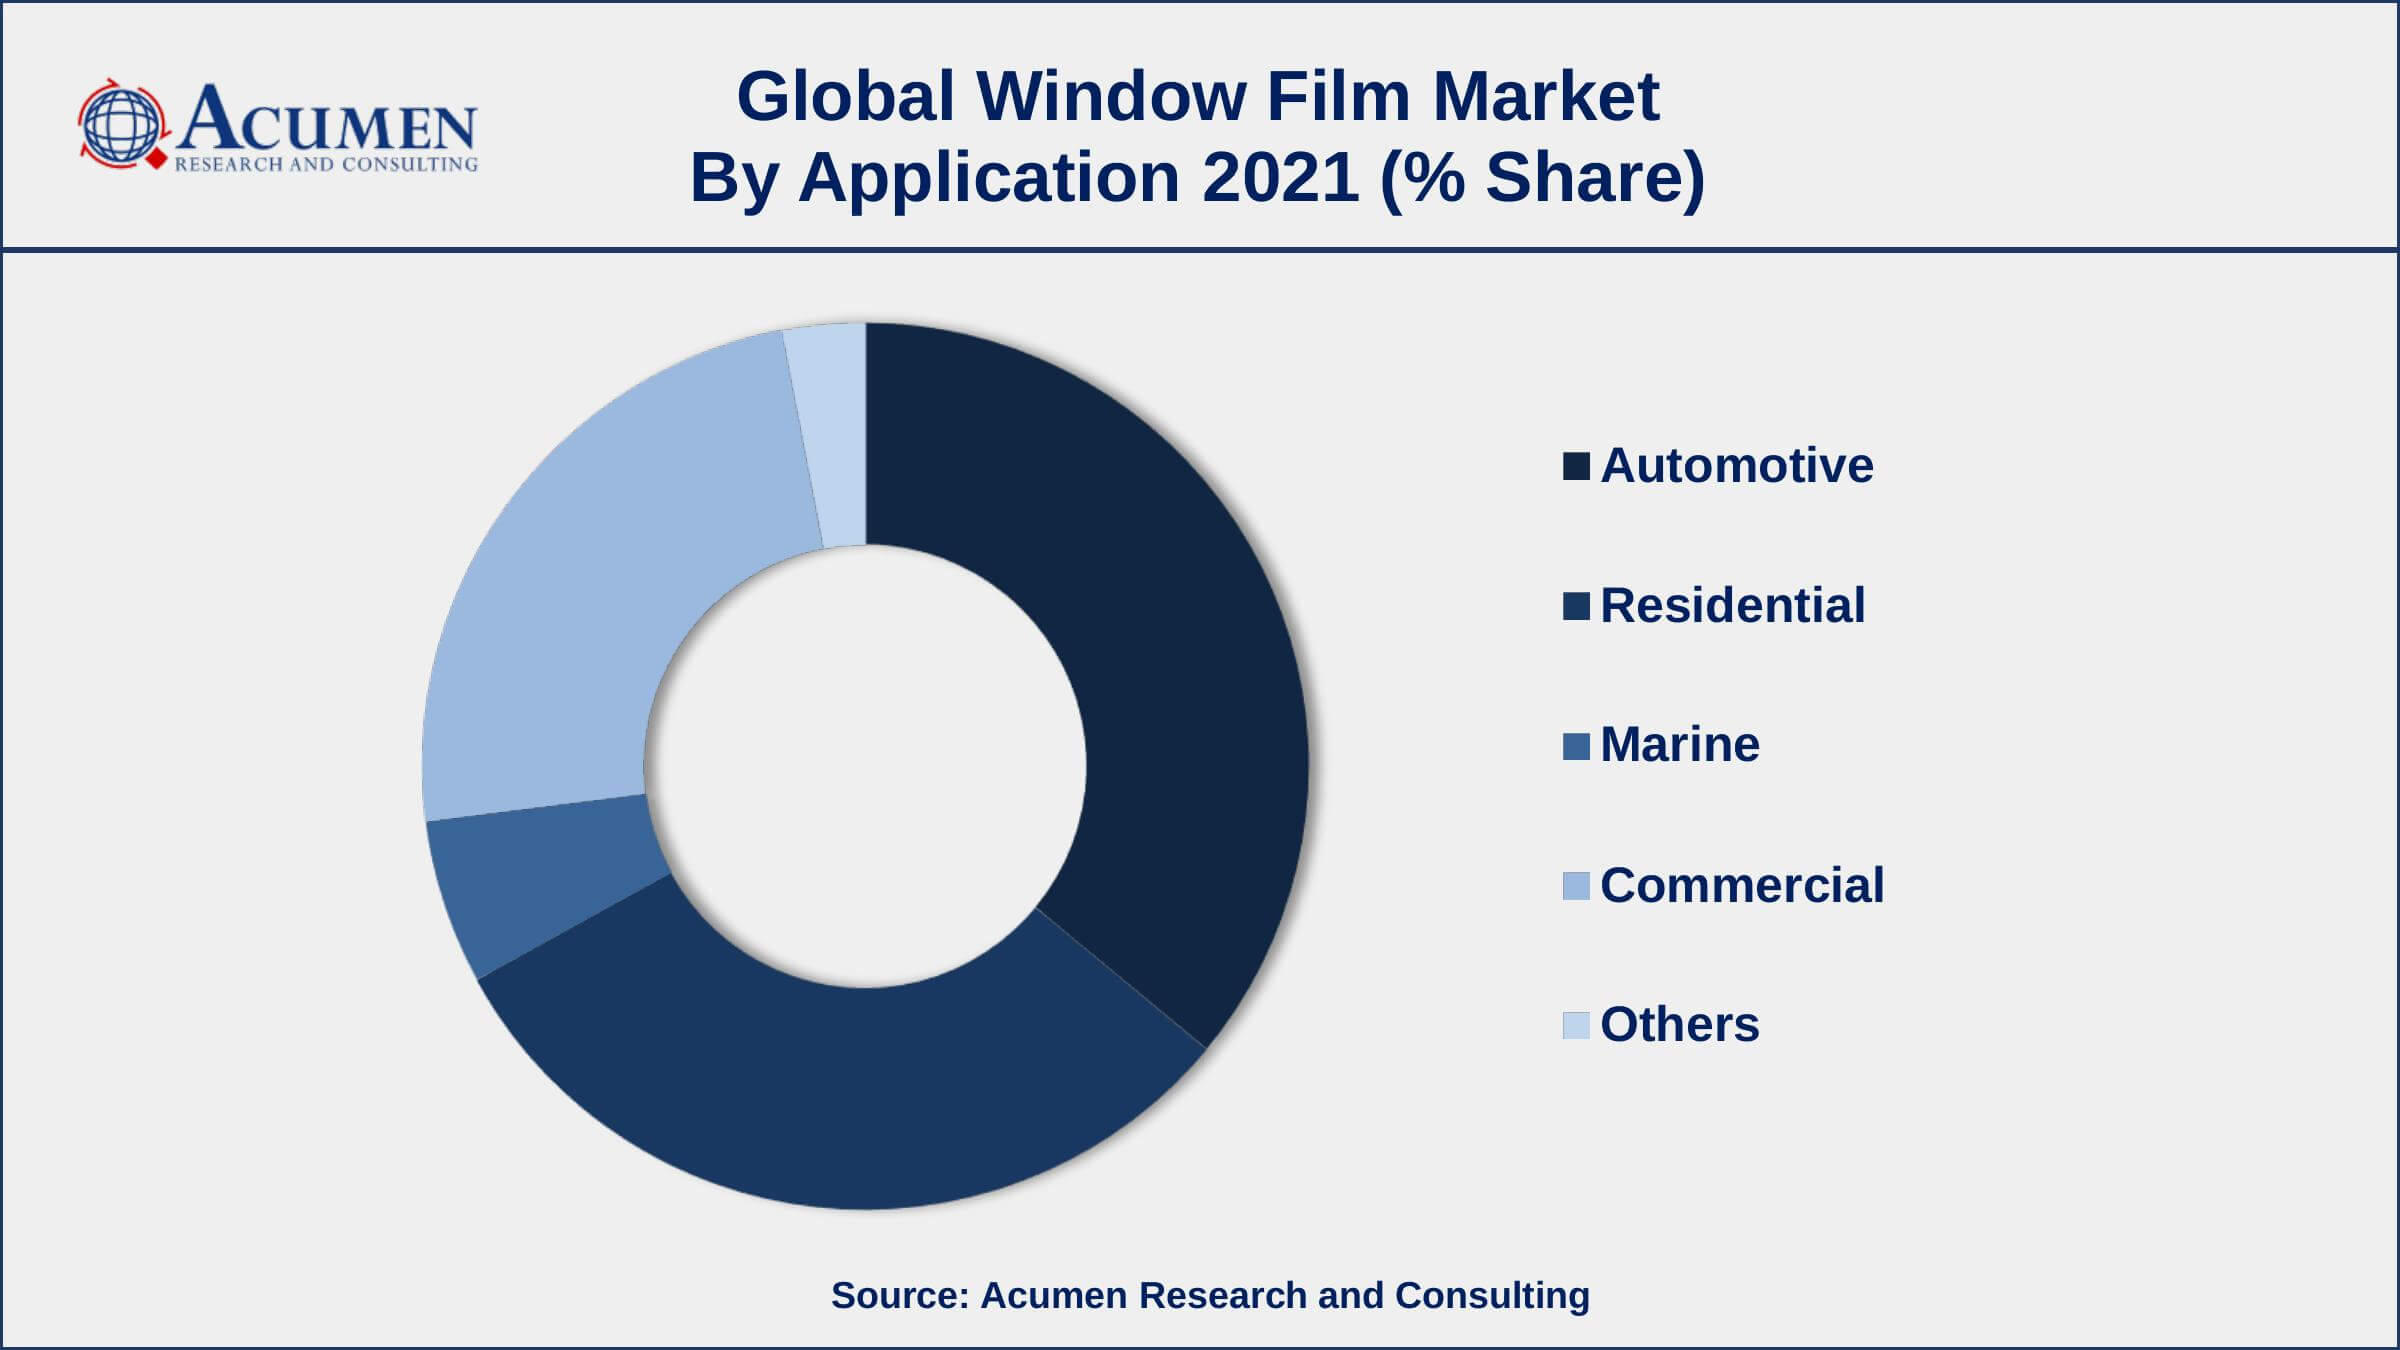 Among application, automotive segment engaged more than 37% of the total market share